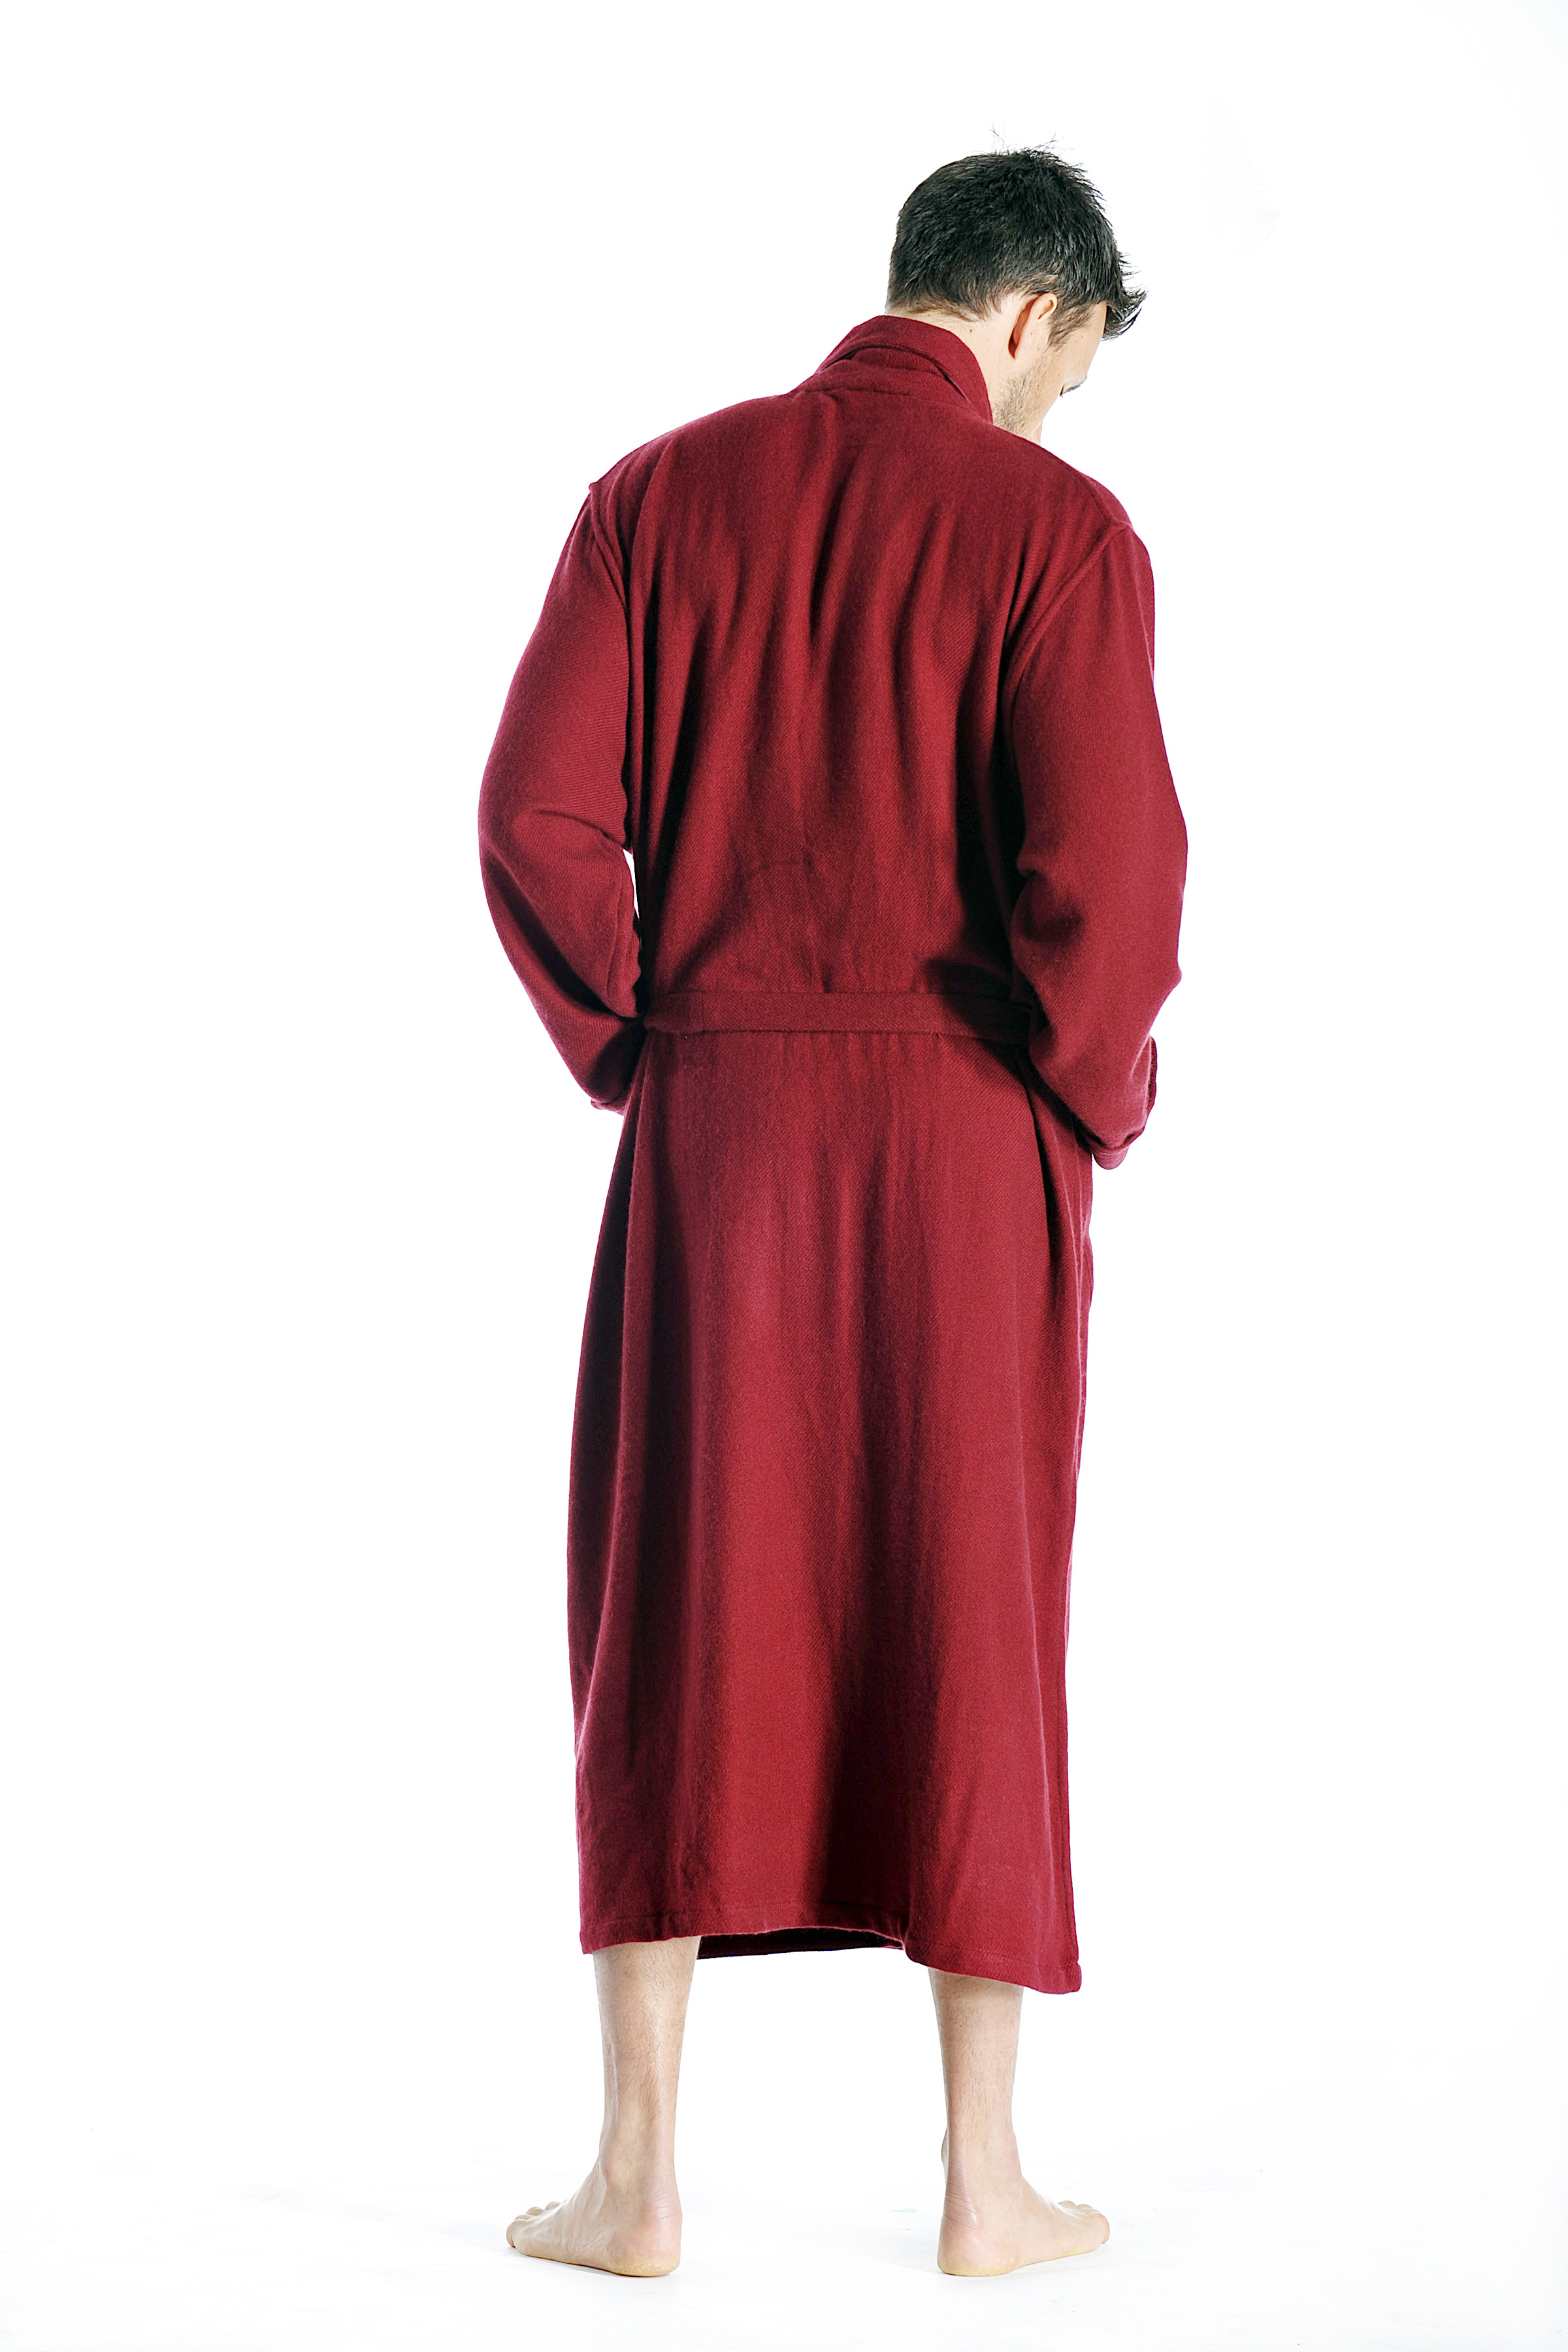 Pure Cashmere Full Length Robe for Men (Charcoal, Small/Medium)